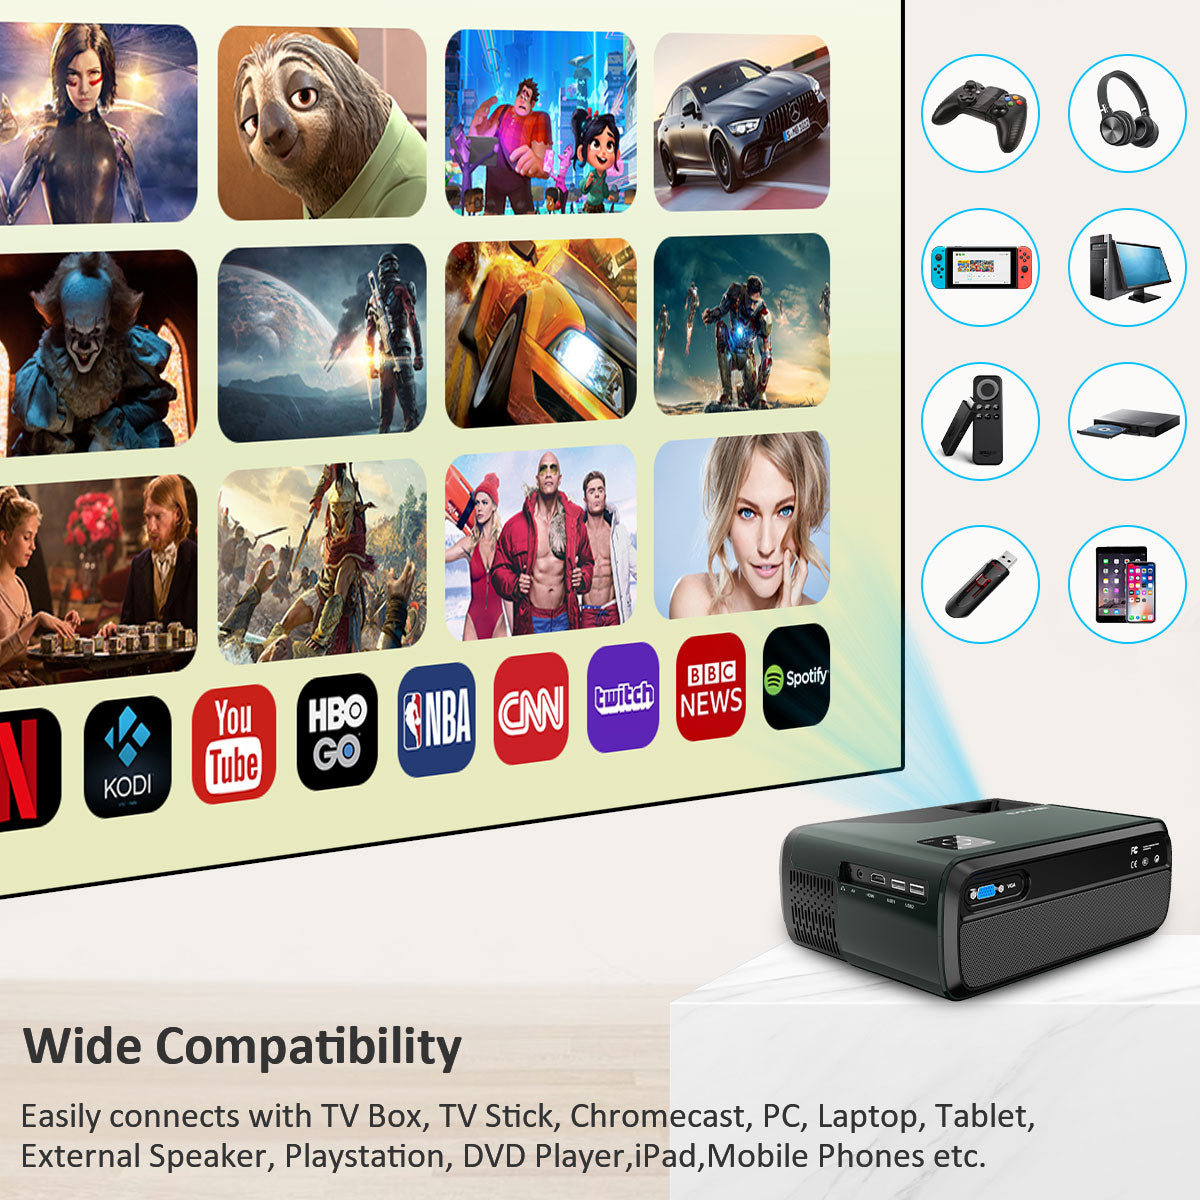 1080P Projector Portable Size, Smart Wireless Bluetooth – CAIWEISHOP